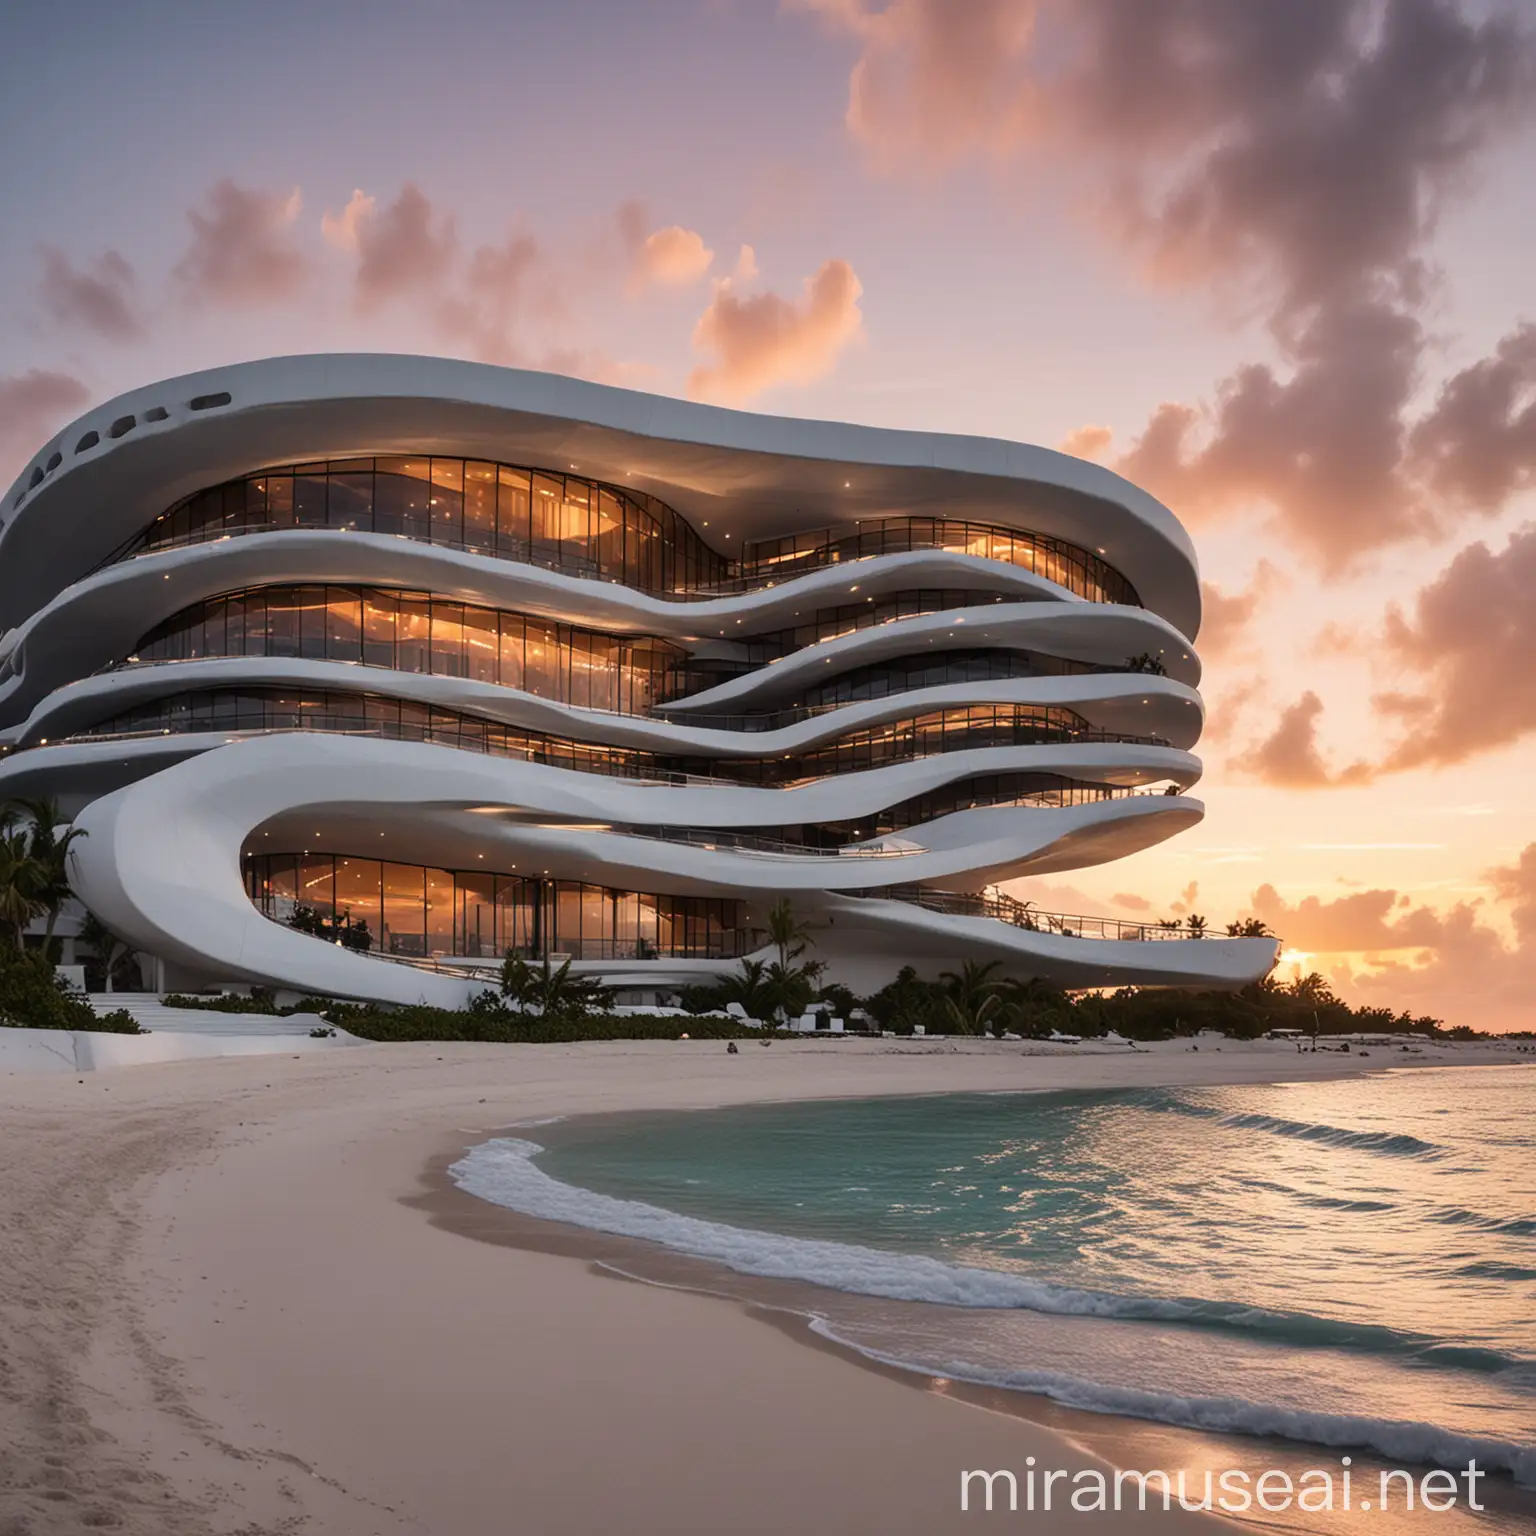 Curvilinear building using Zaha Hadid architecture for a hotel in the Bahamas, over looking a scenic sea front with a beautiful sunset


